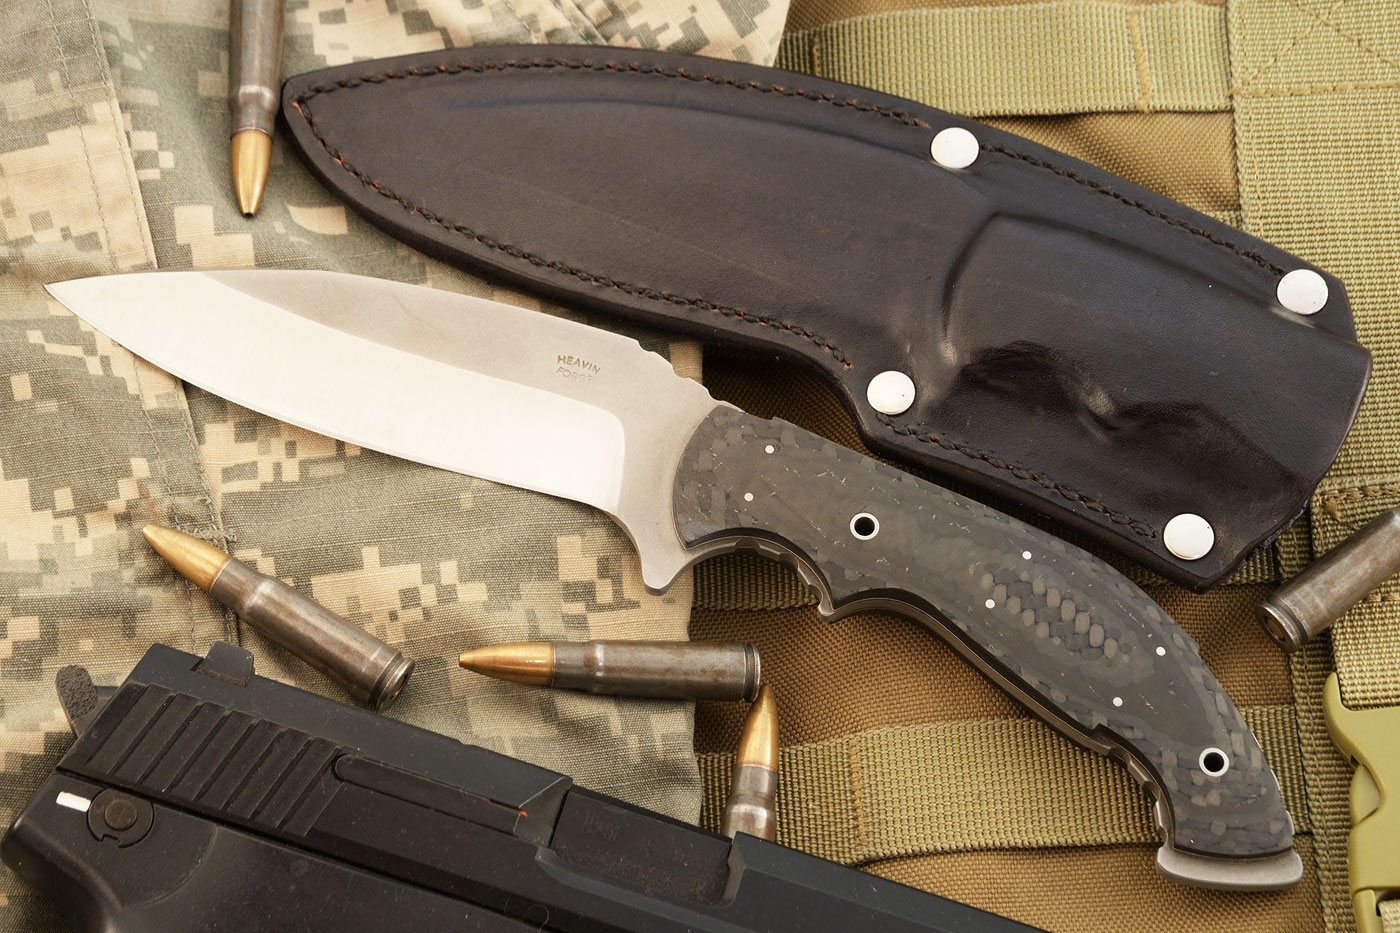 Tactical Utility Knife with Carbon Fiber